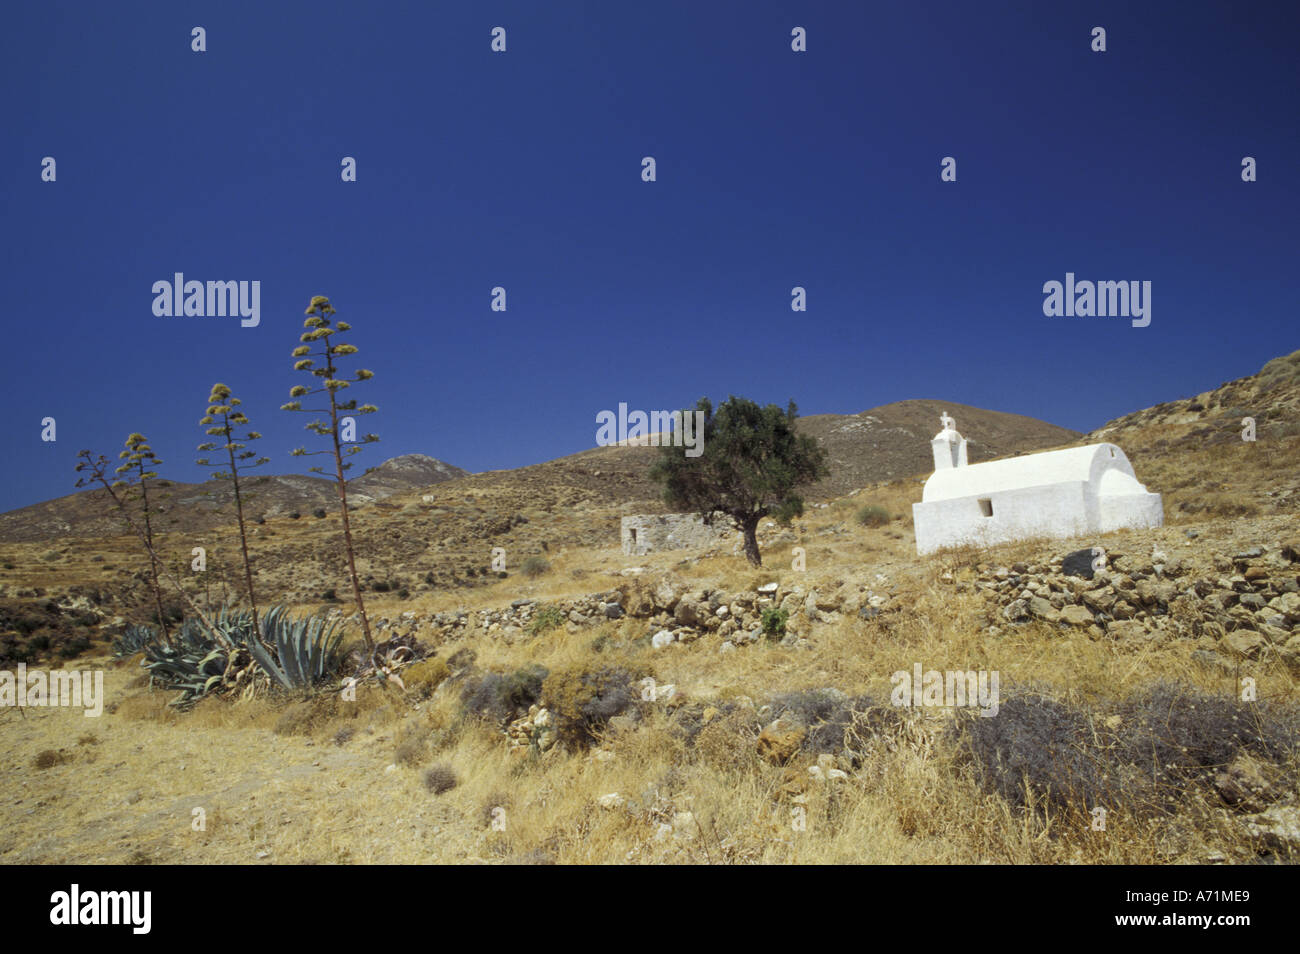 Europe, Greece, Cyclades Islands, Anafi. White chapel, olive tree and blooming agave trees Stock Photo